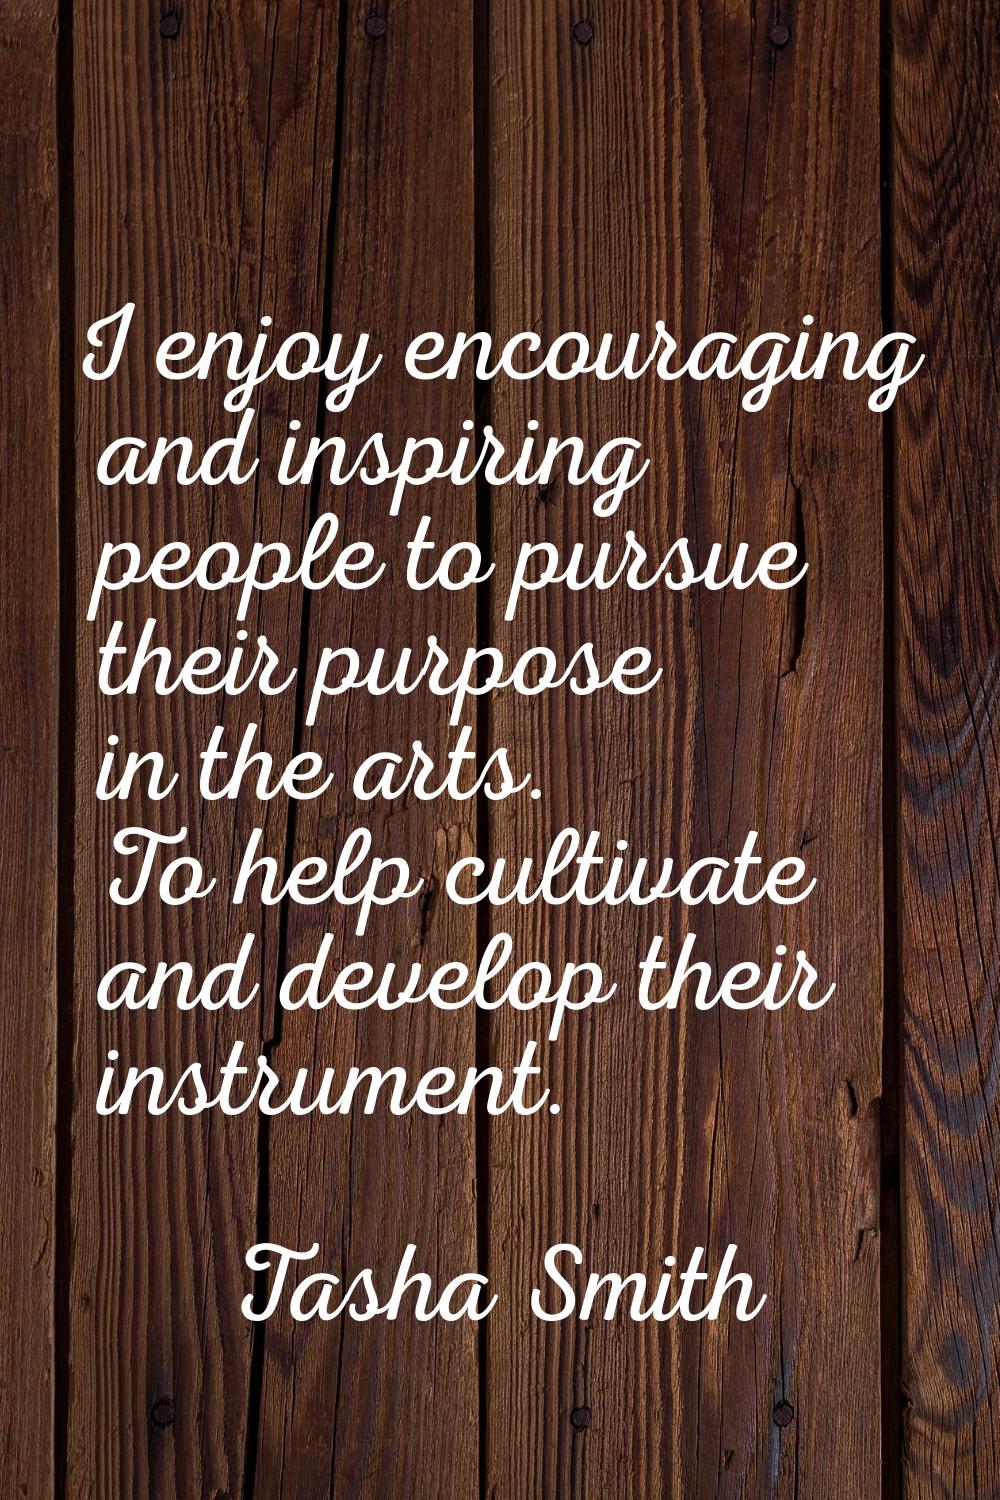 I enjoy encouraging and inspiring people to pursue their purpose in the arts. To help cultivate and